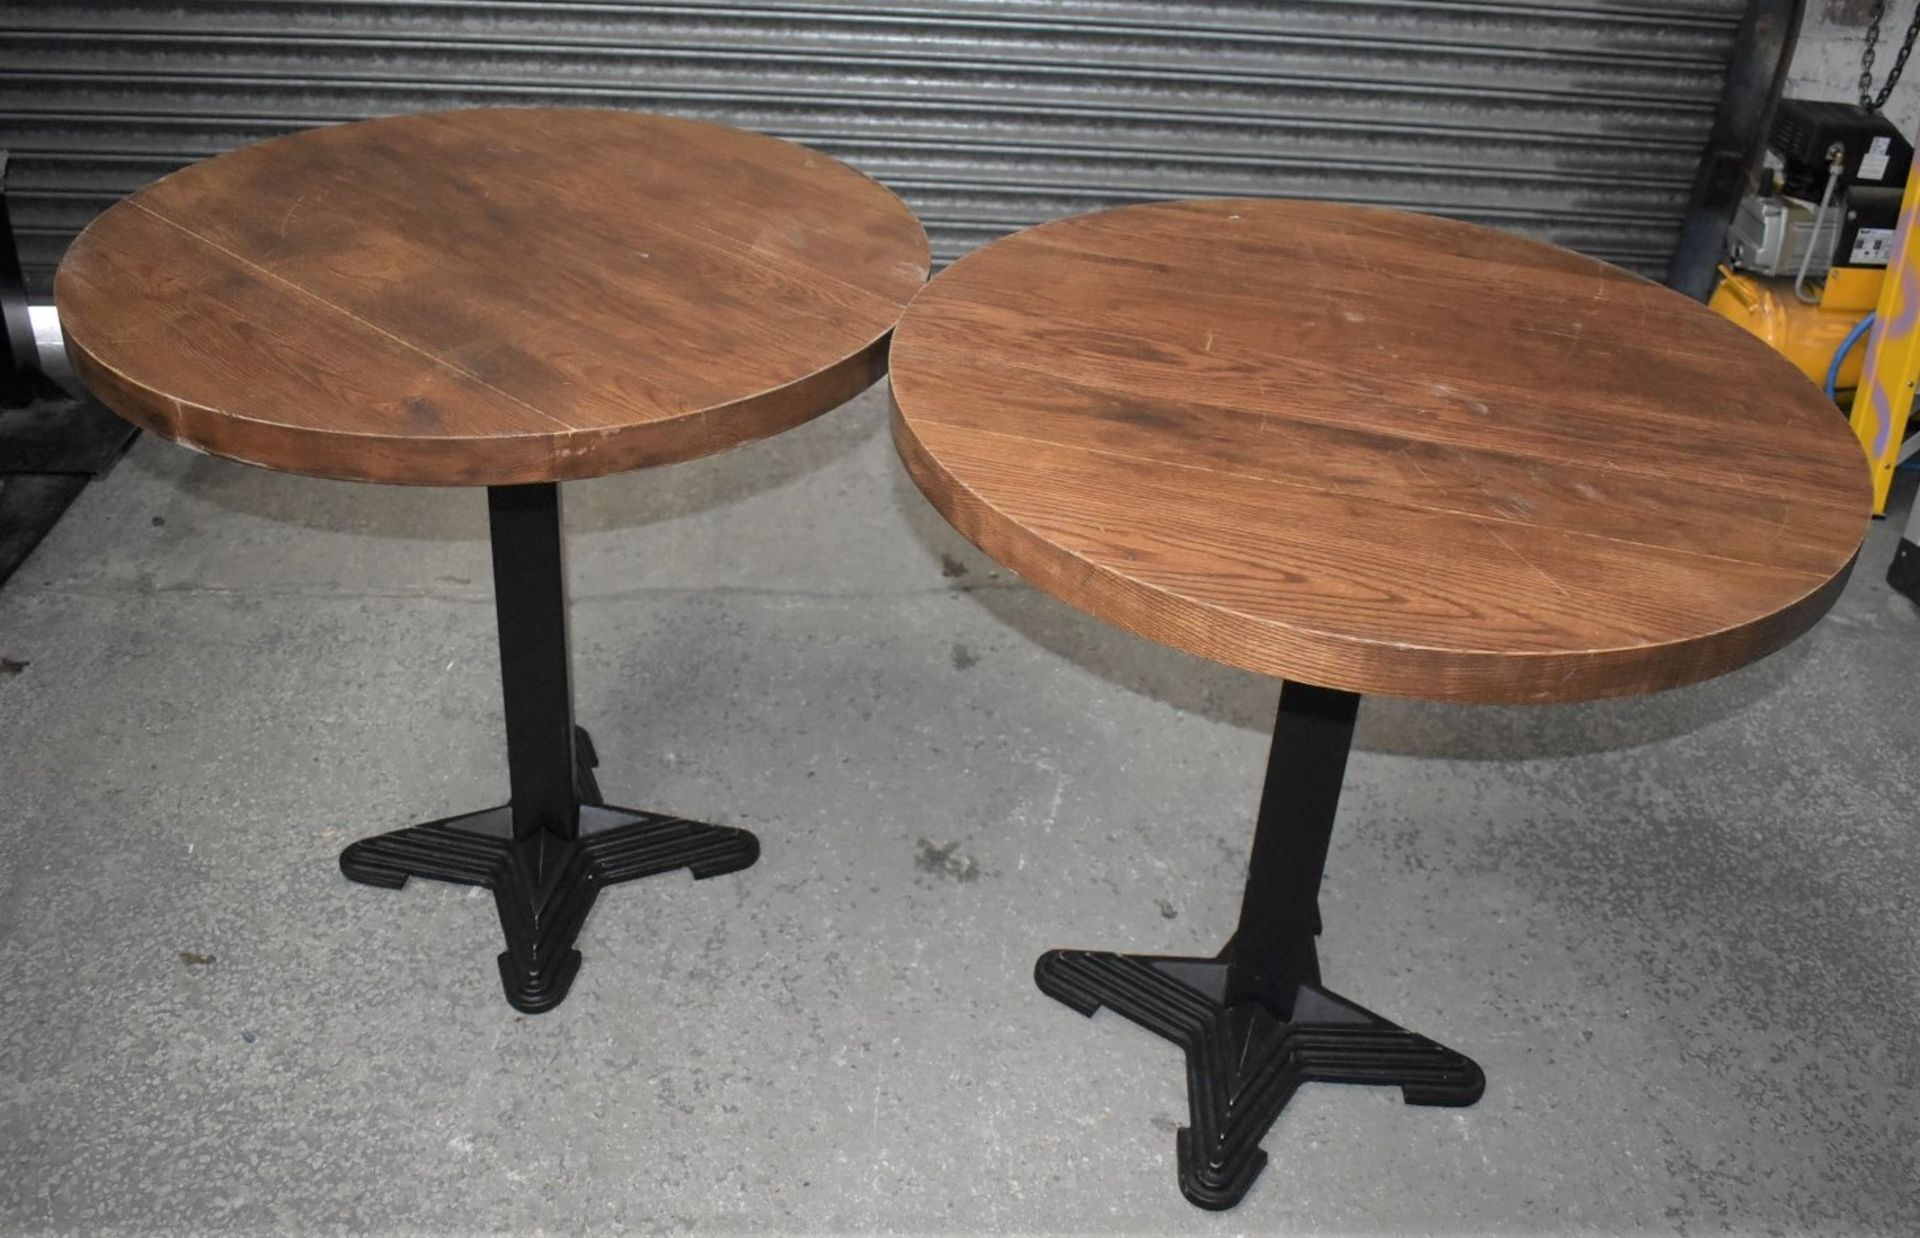 9 x Restaurant Dining Tables With Cast Iron Bases and Solid Wood Tops - Includes Square and Round - Image 10 of 13